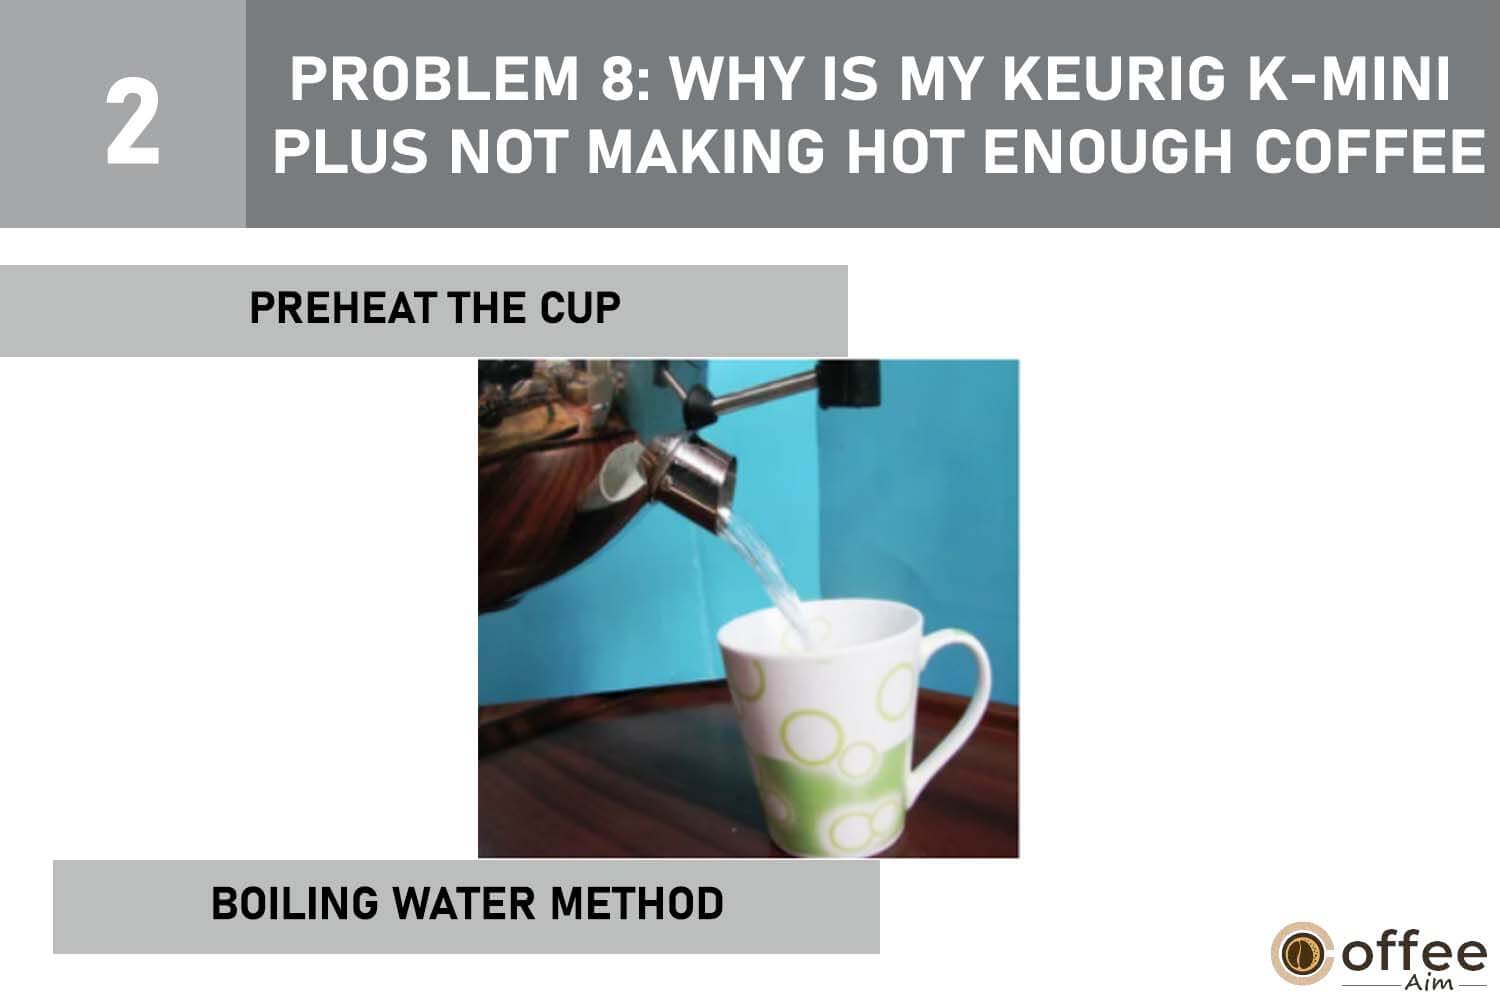 This image depicts the "Boiling water method" for addressing Problem 8: "Why is My Keurig K-Mini Plus Not Making Hot Enough Coffee?" in our article titled "Keurig K-Mini Plus Problems."





